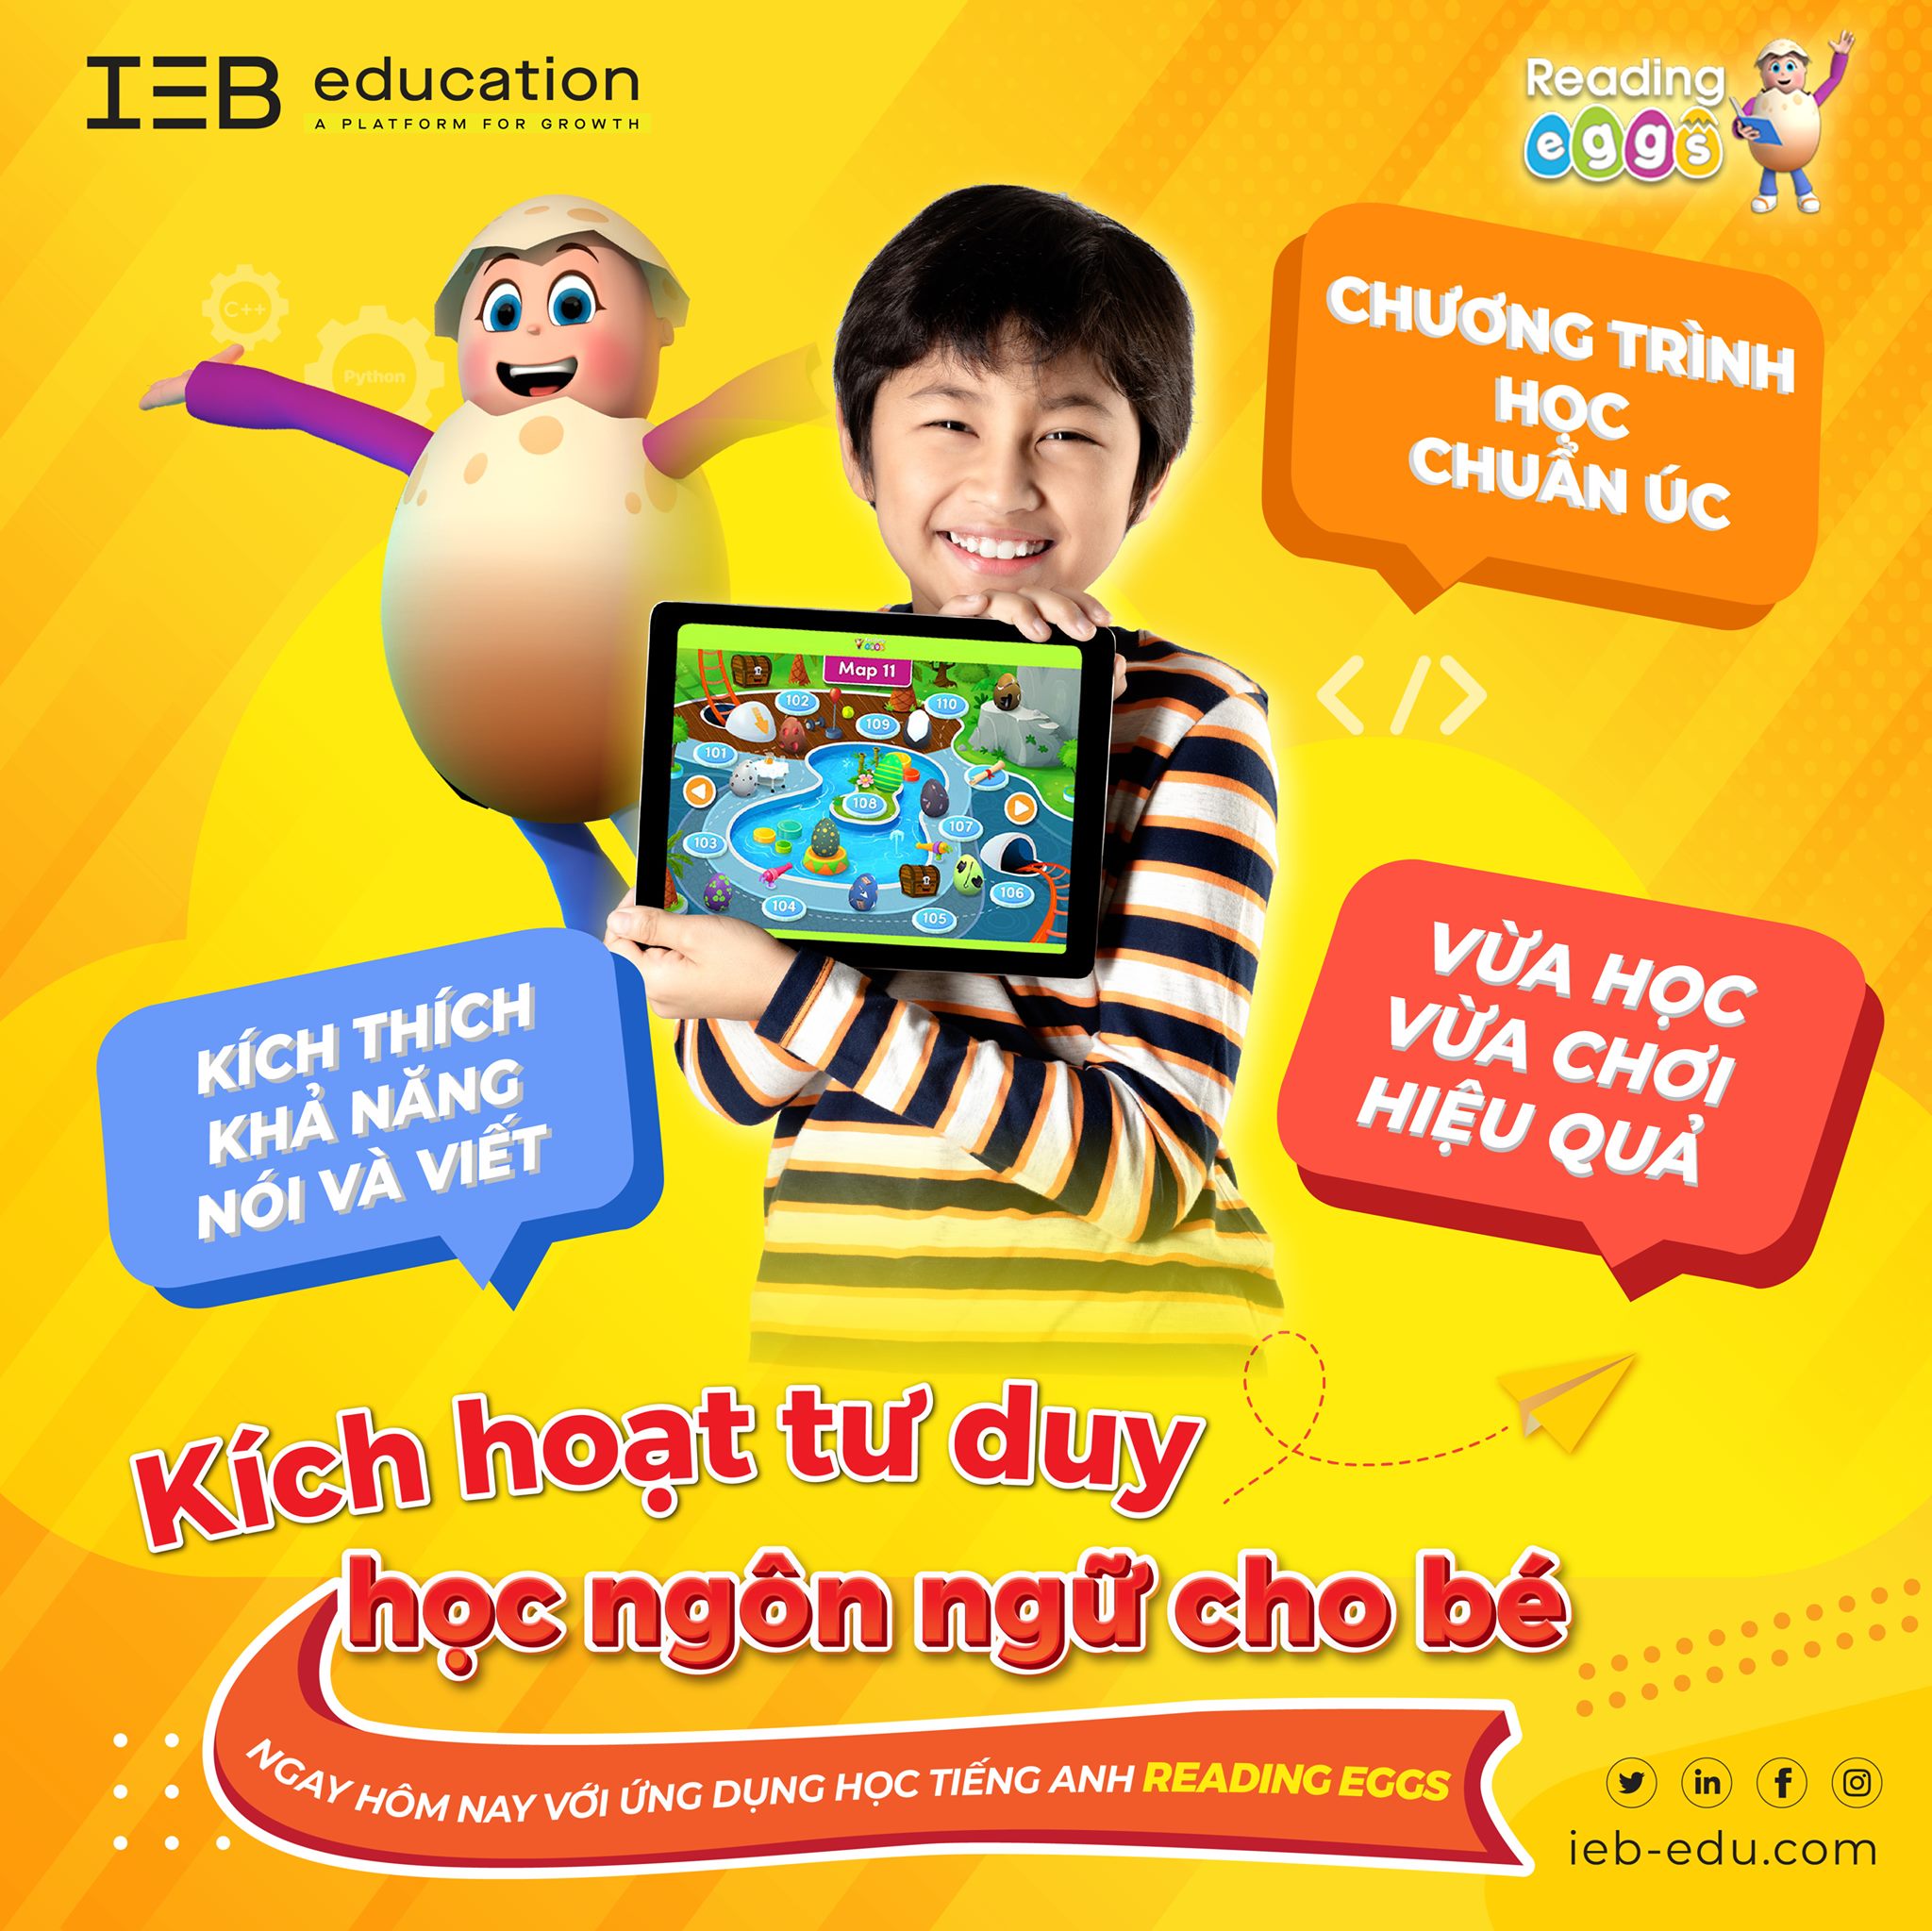 READING EGGS – AN ONLINE ENGLISH LEARNING APP FOR KIDS